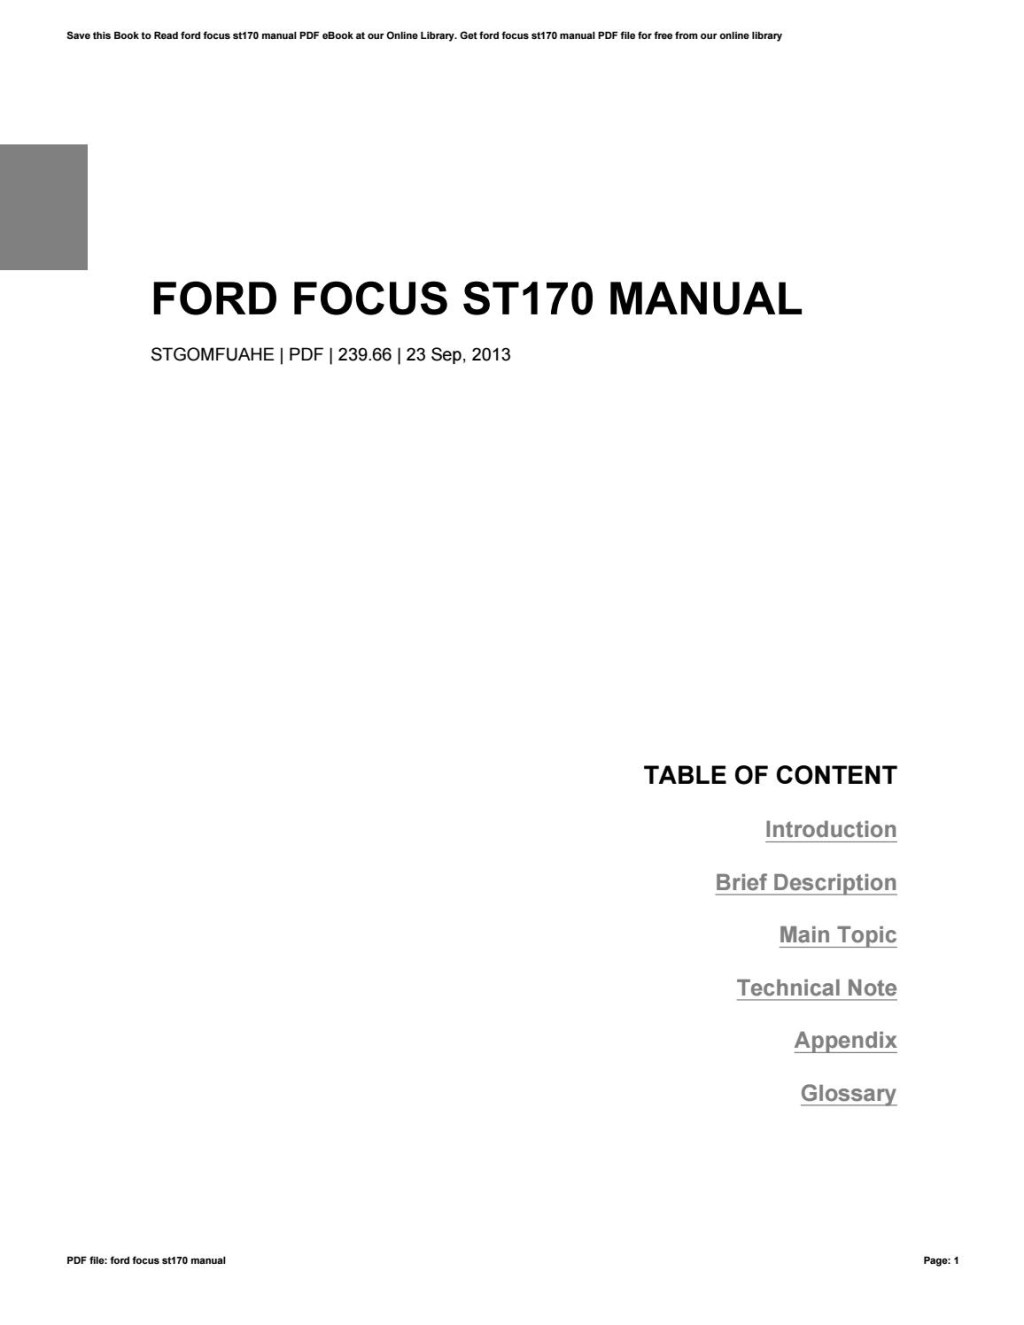 Picture of: Ford focus st manual by te – Issuu